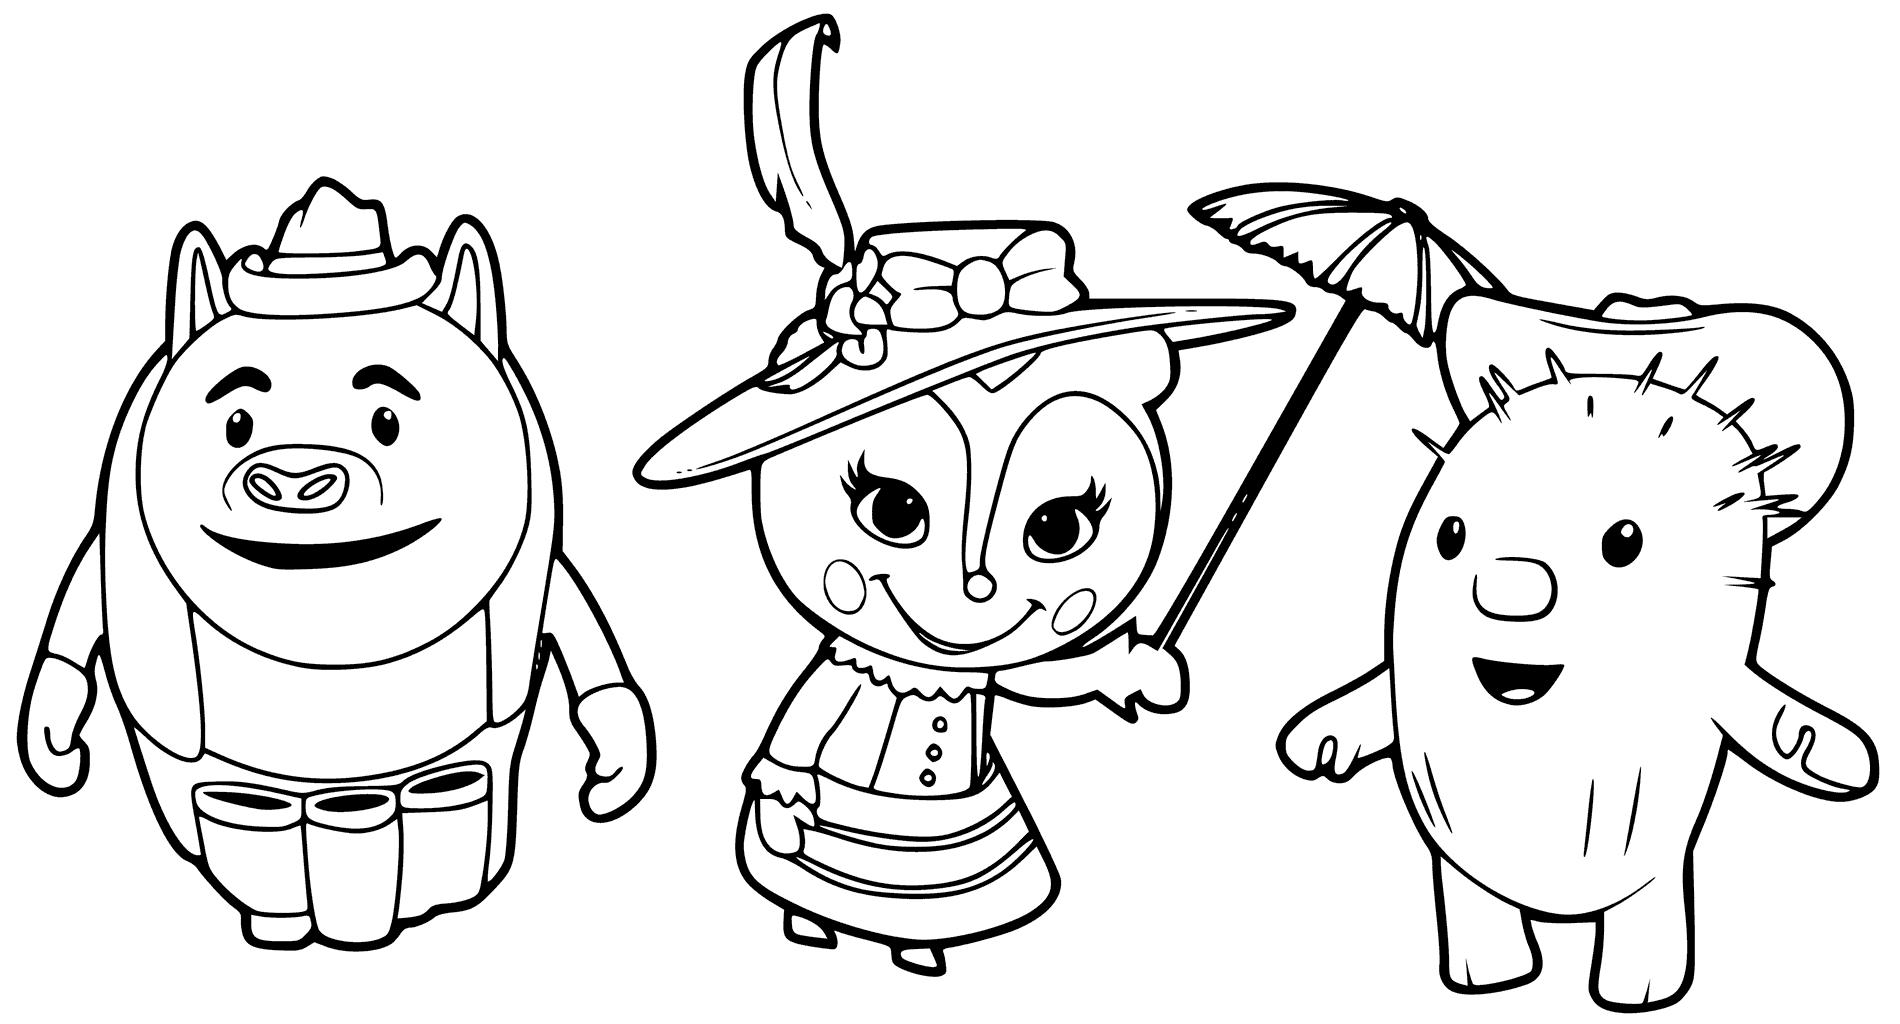 Sheriff Callie Coloring Pages - Best Coloring Pages For Kids